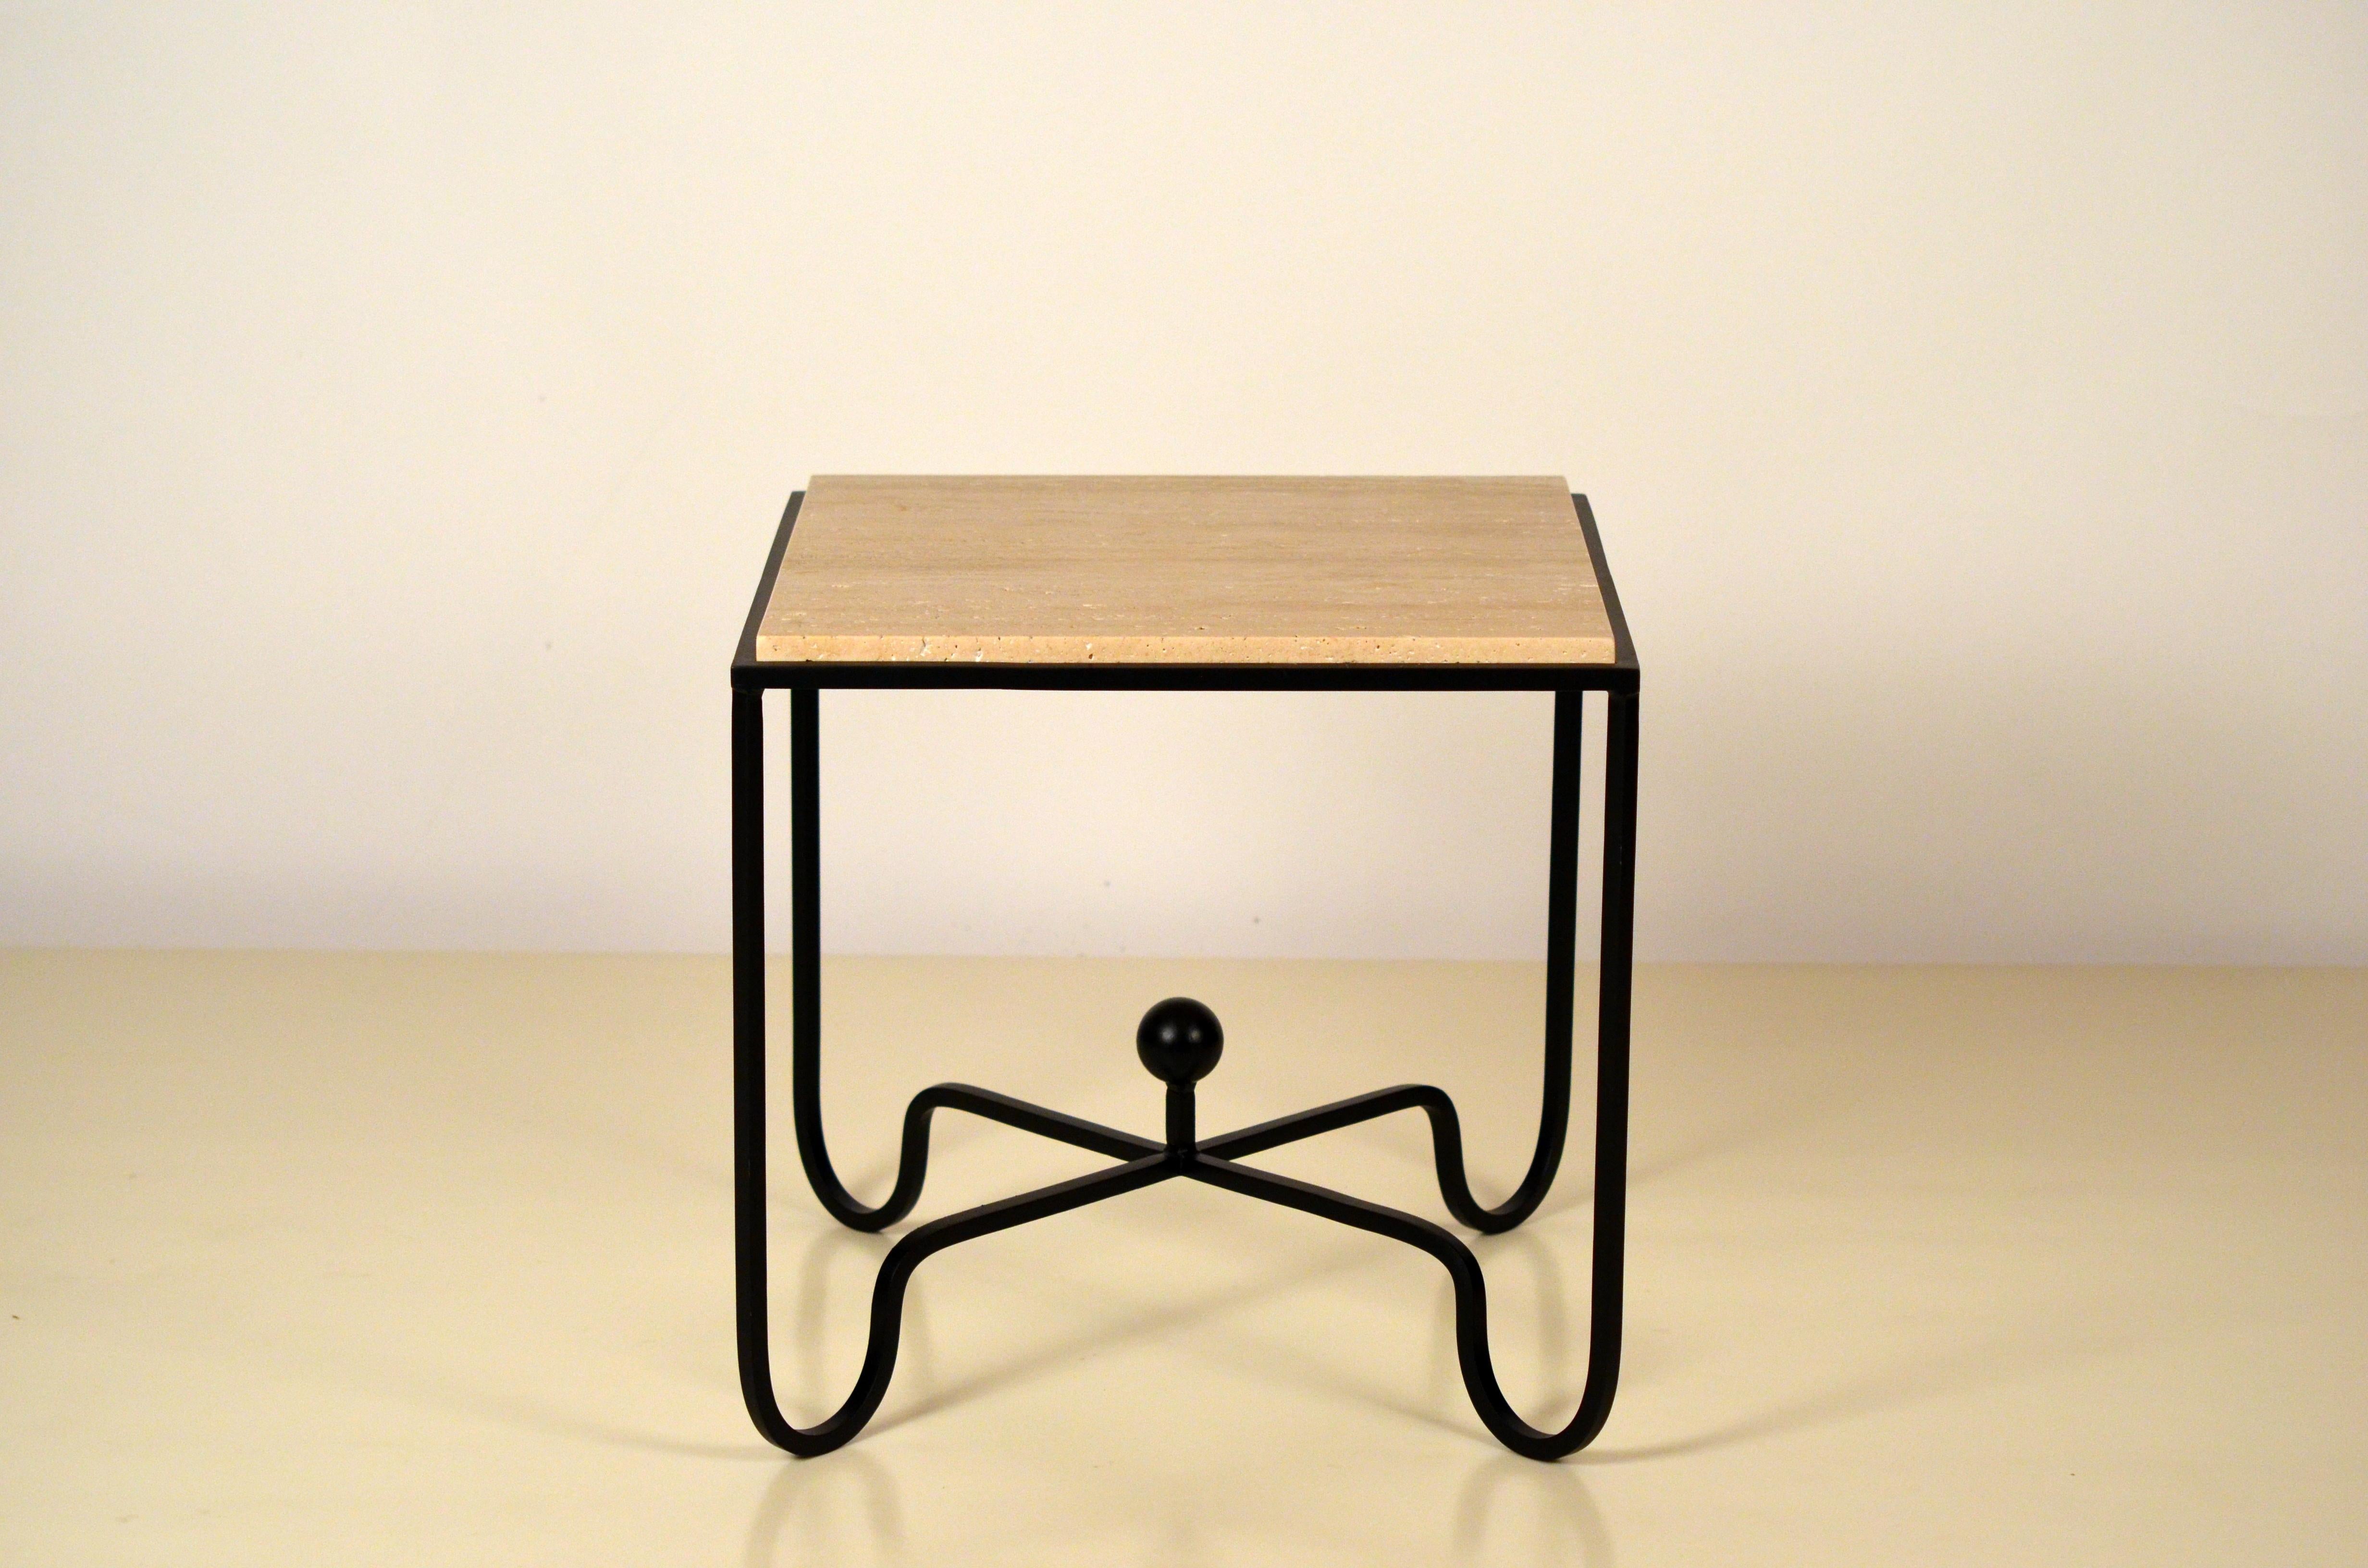 Wrought iron and travertine 'Entretoise' side table by Design Frères.